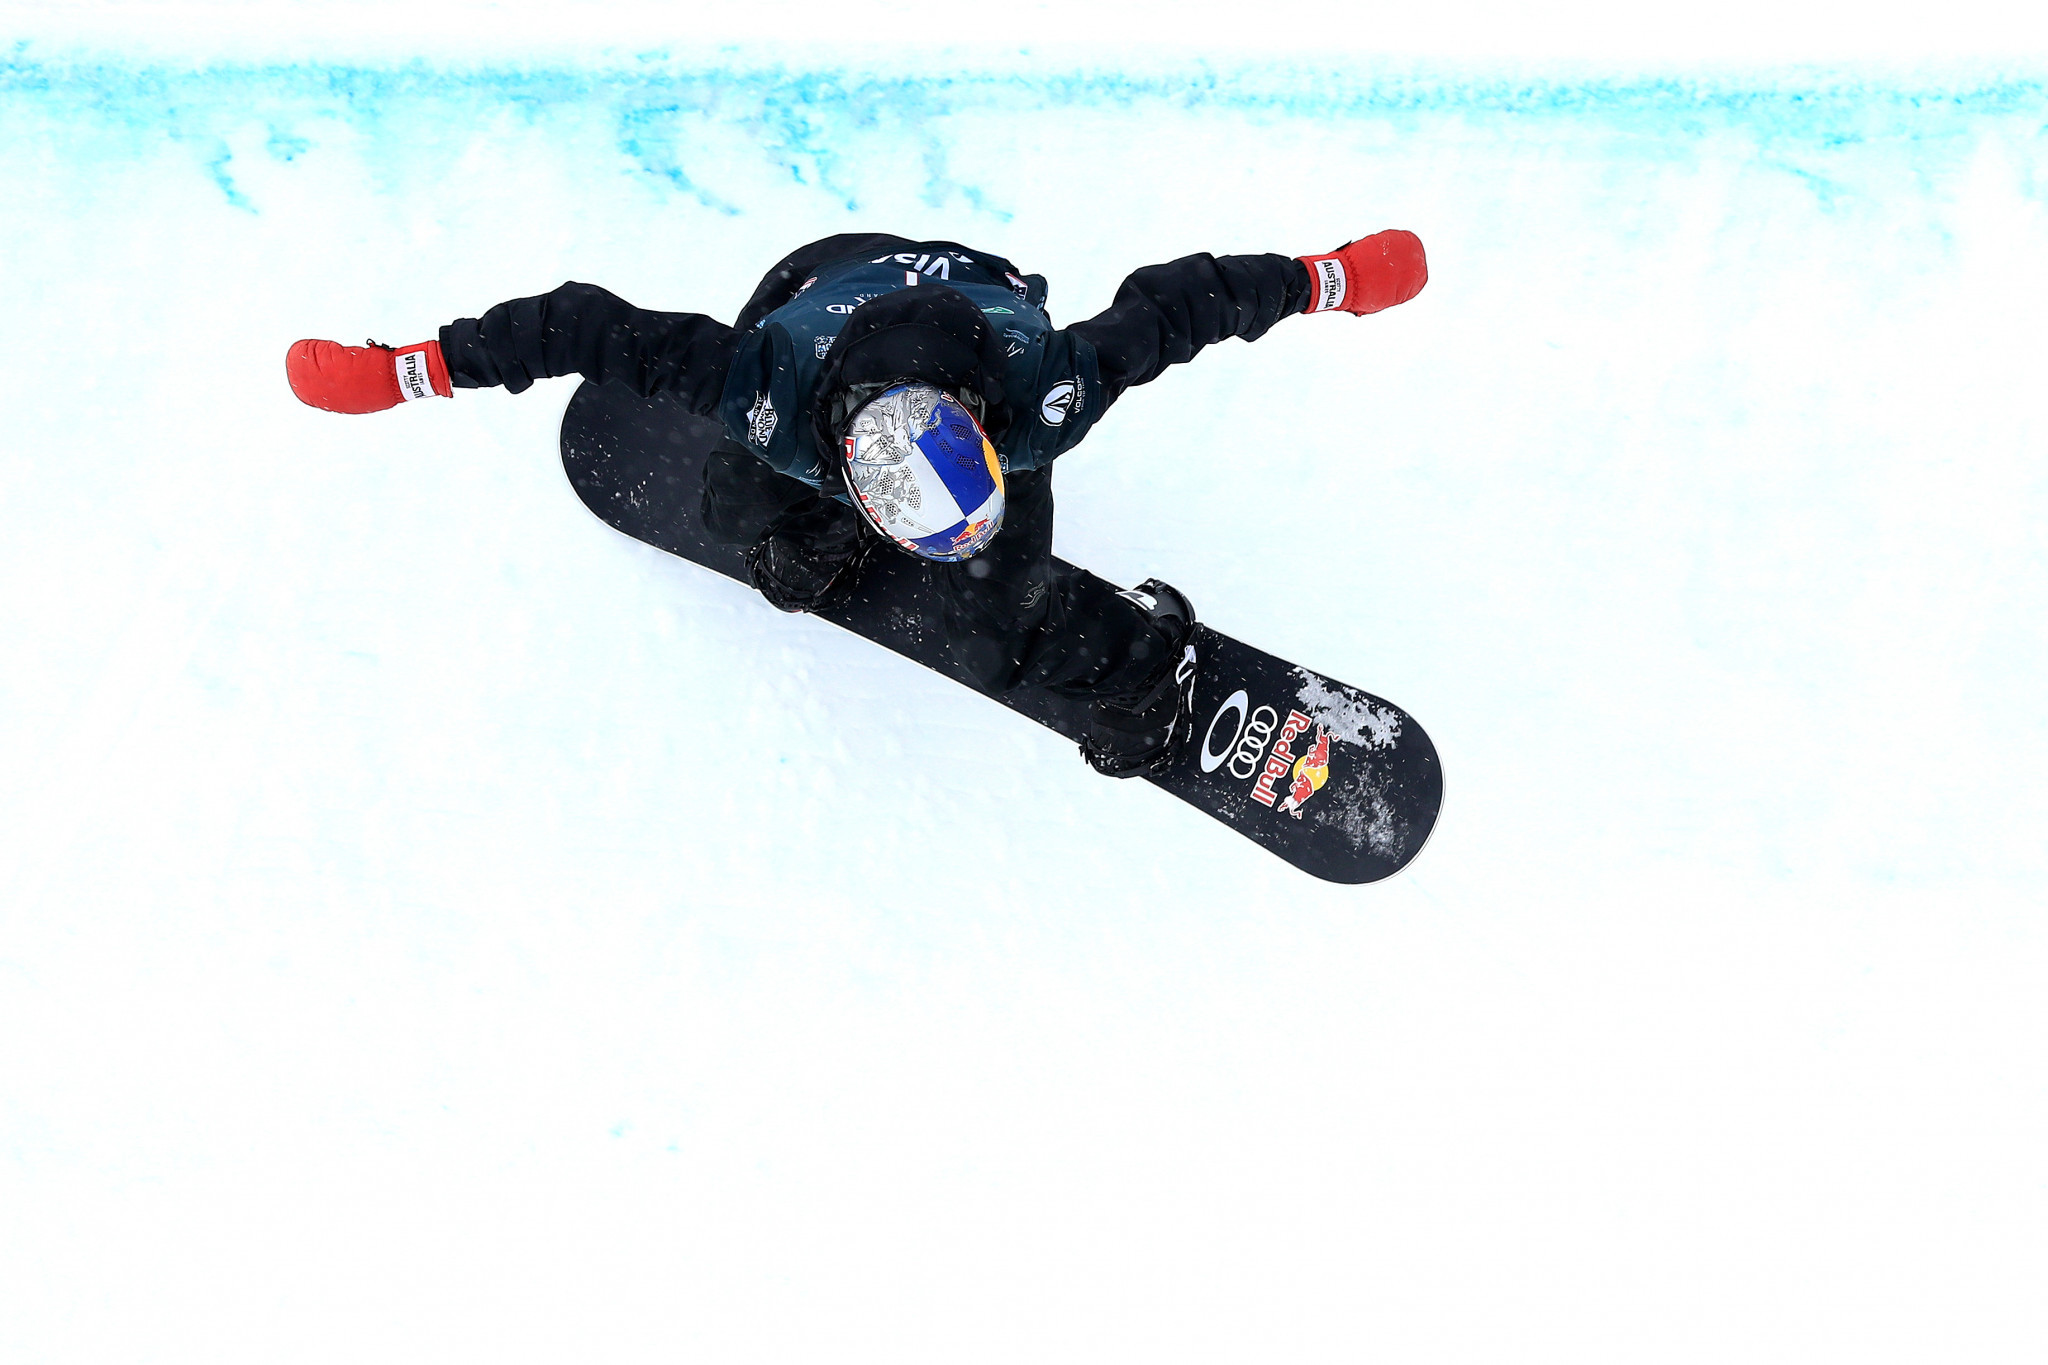 James wins men's halfpipe at FIS Snowboard World Cup in Laax for second year running